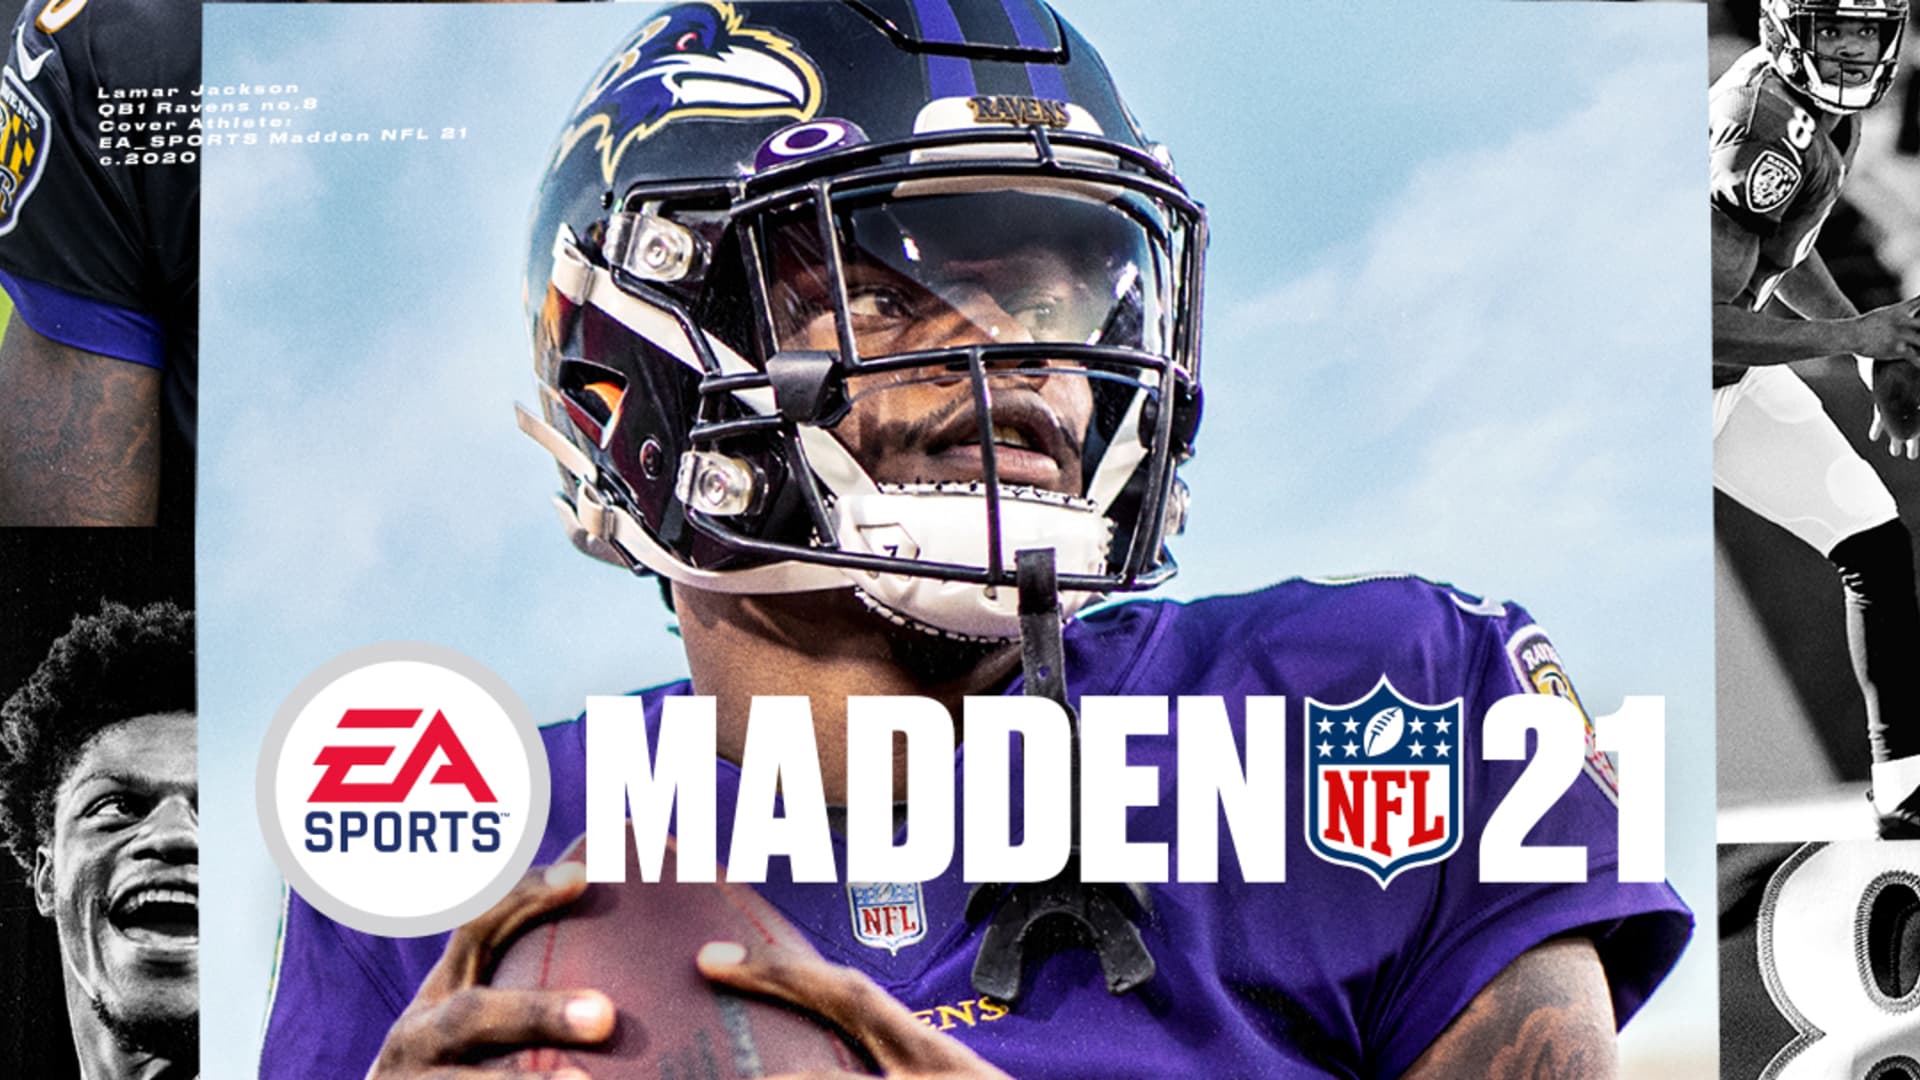 EA Sports M21 Madden 21 video game